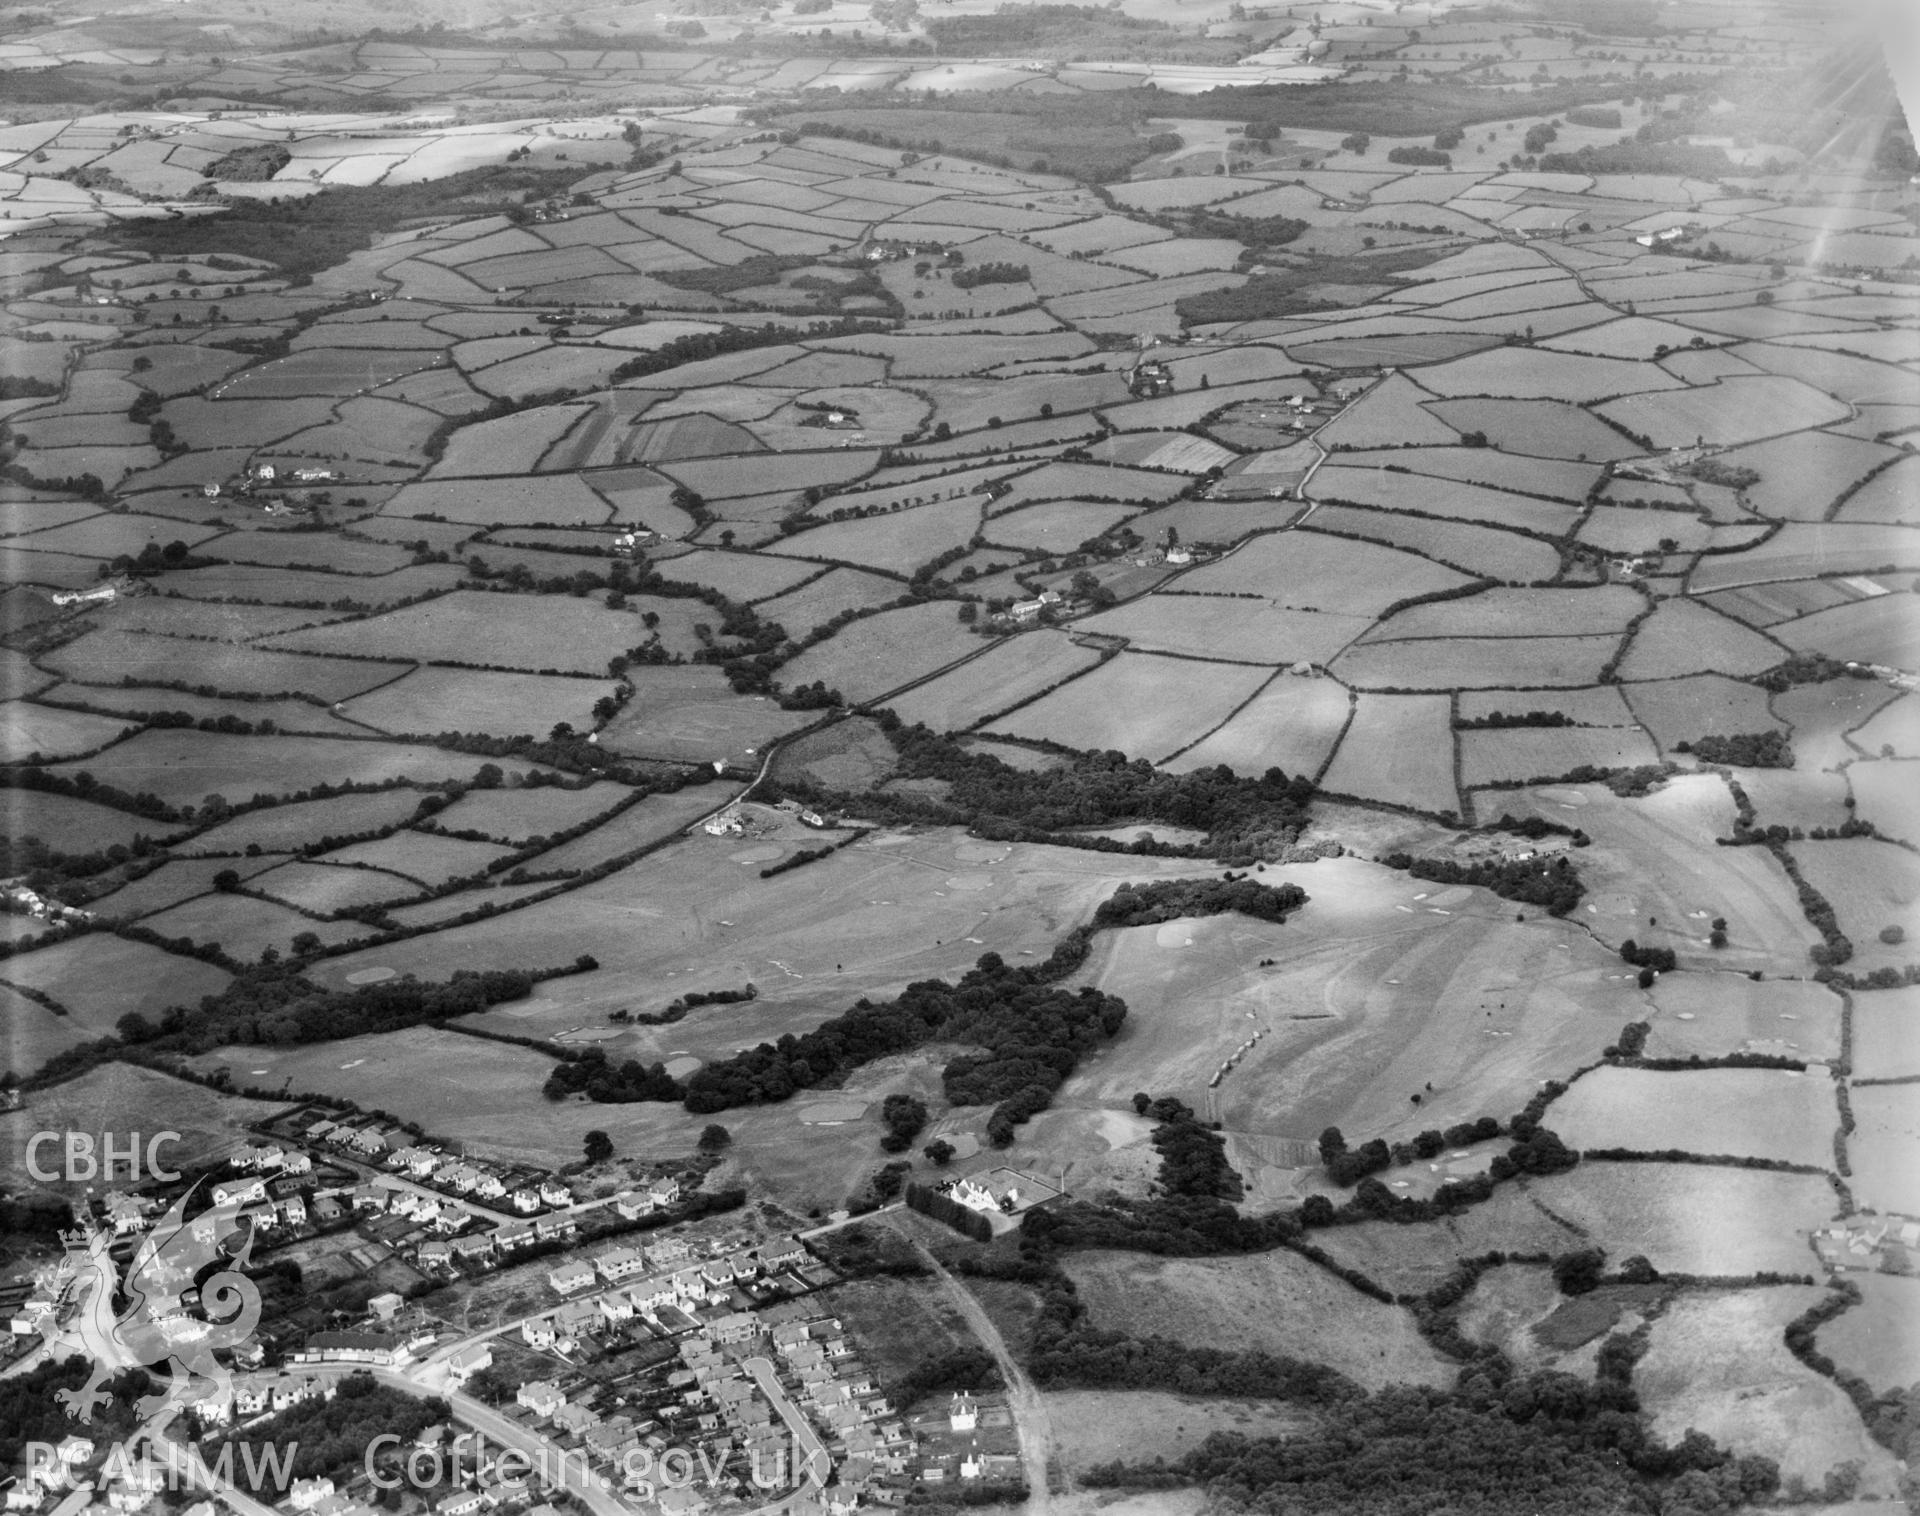 View of Cardiff golf club, oblique aerial view. 5?x4? black and white glass plate negative.